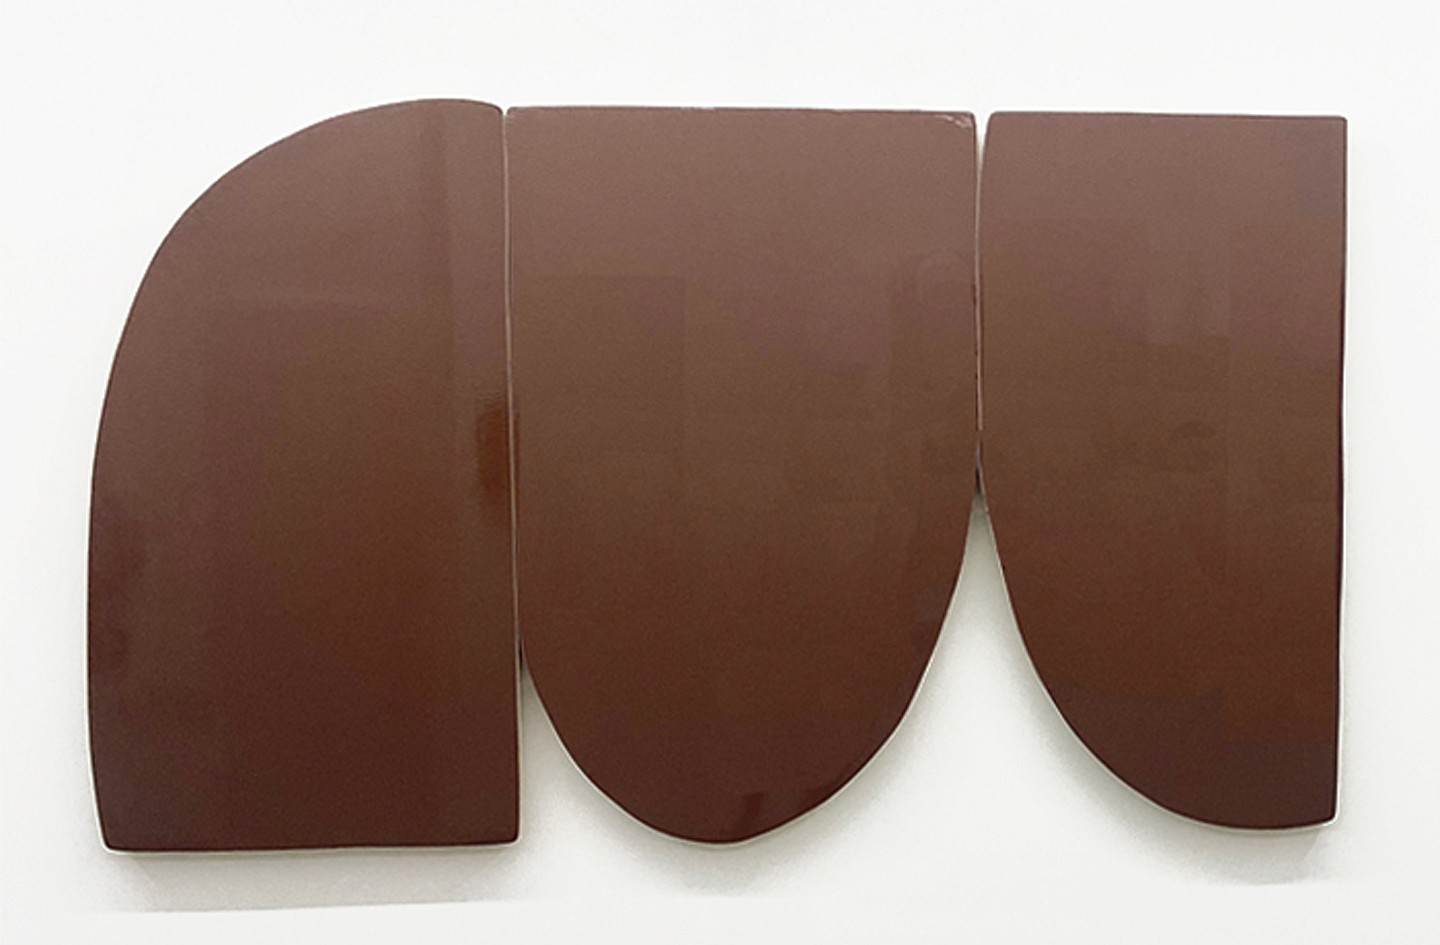 Andrew Zimmerman
Sandstone Pearl, 2023
ZIM1080
Automotive paint on wood, 44 1/2 x 75 x 1 1/2 inches